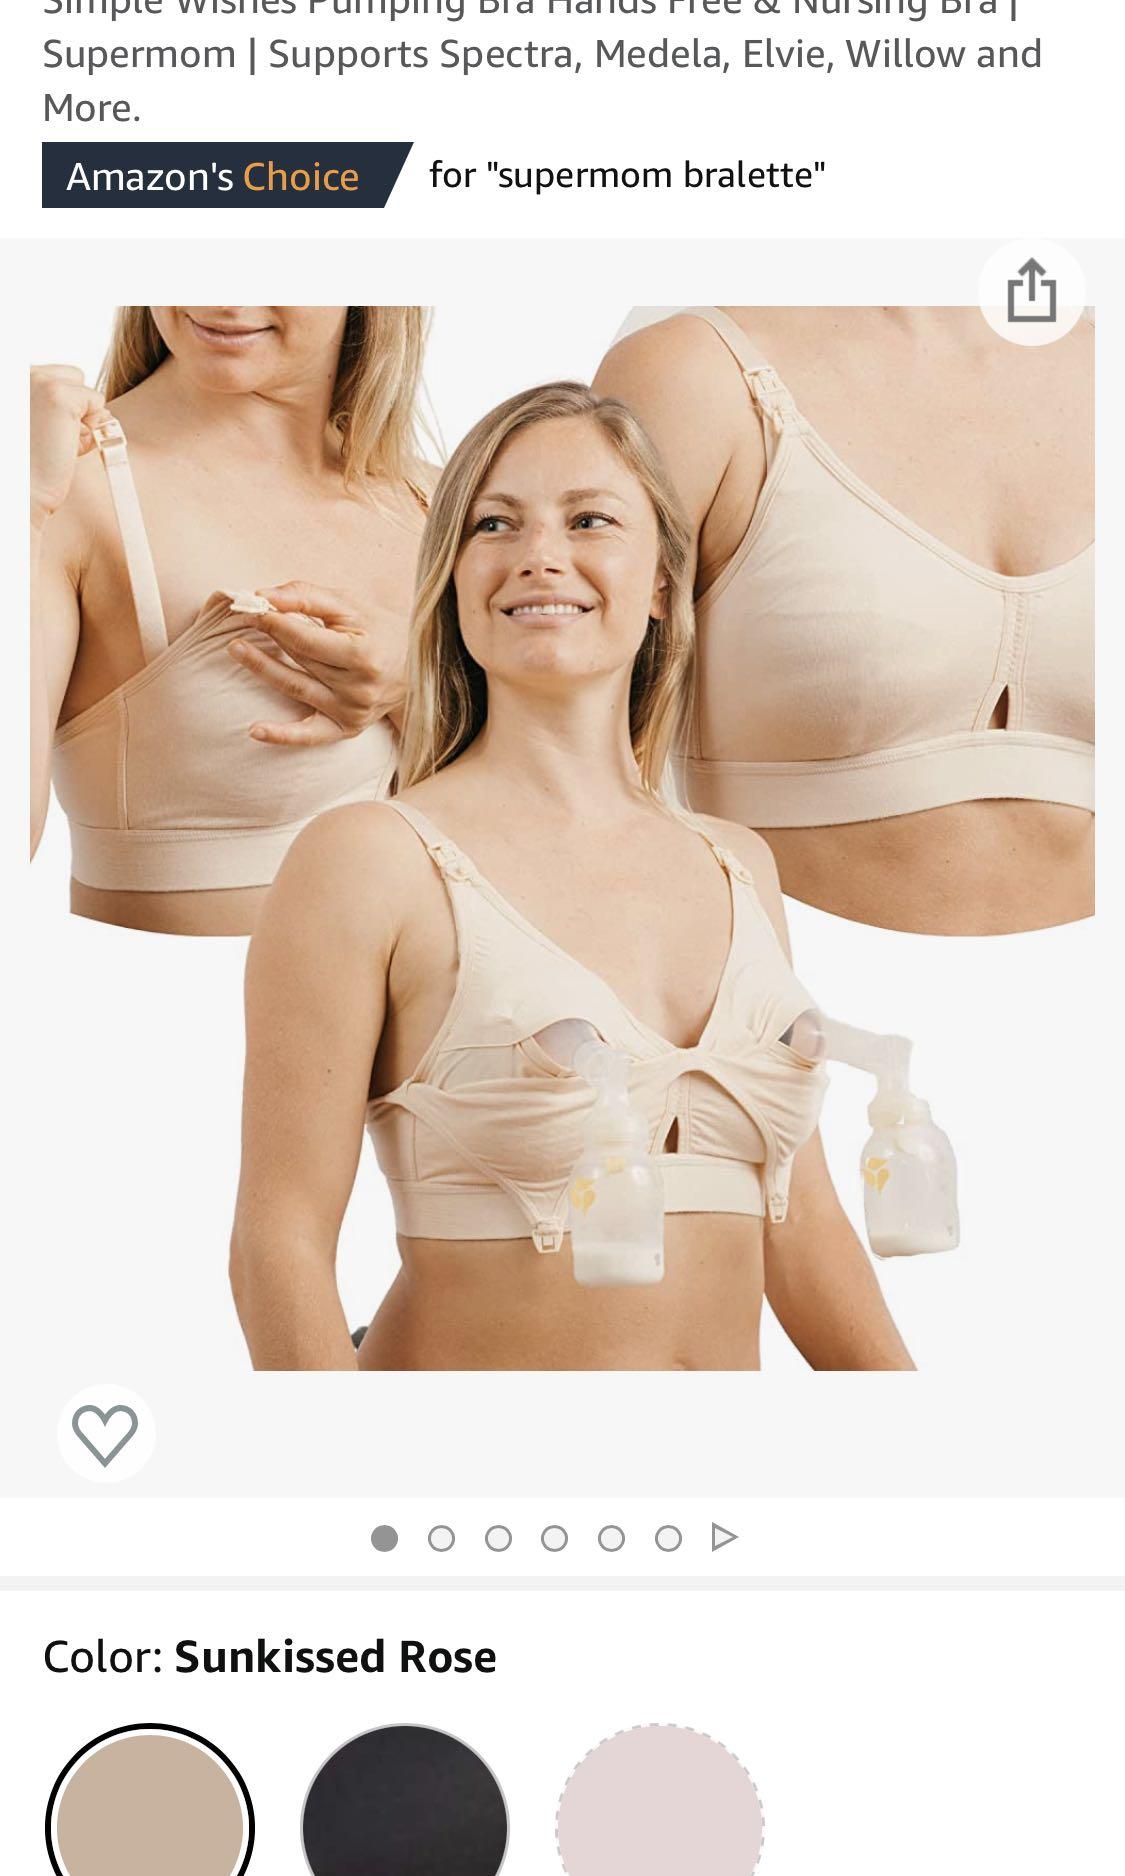 Simple Wishes® Supermom 3 in One Bra